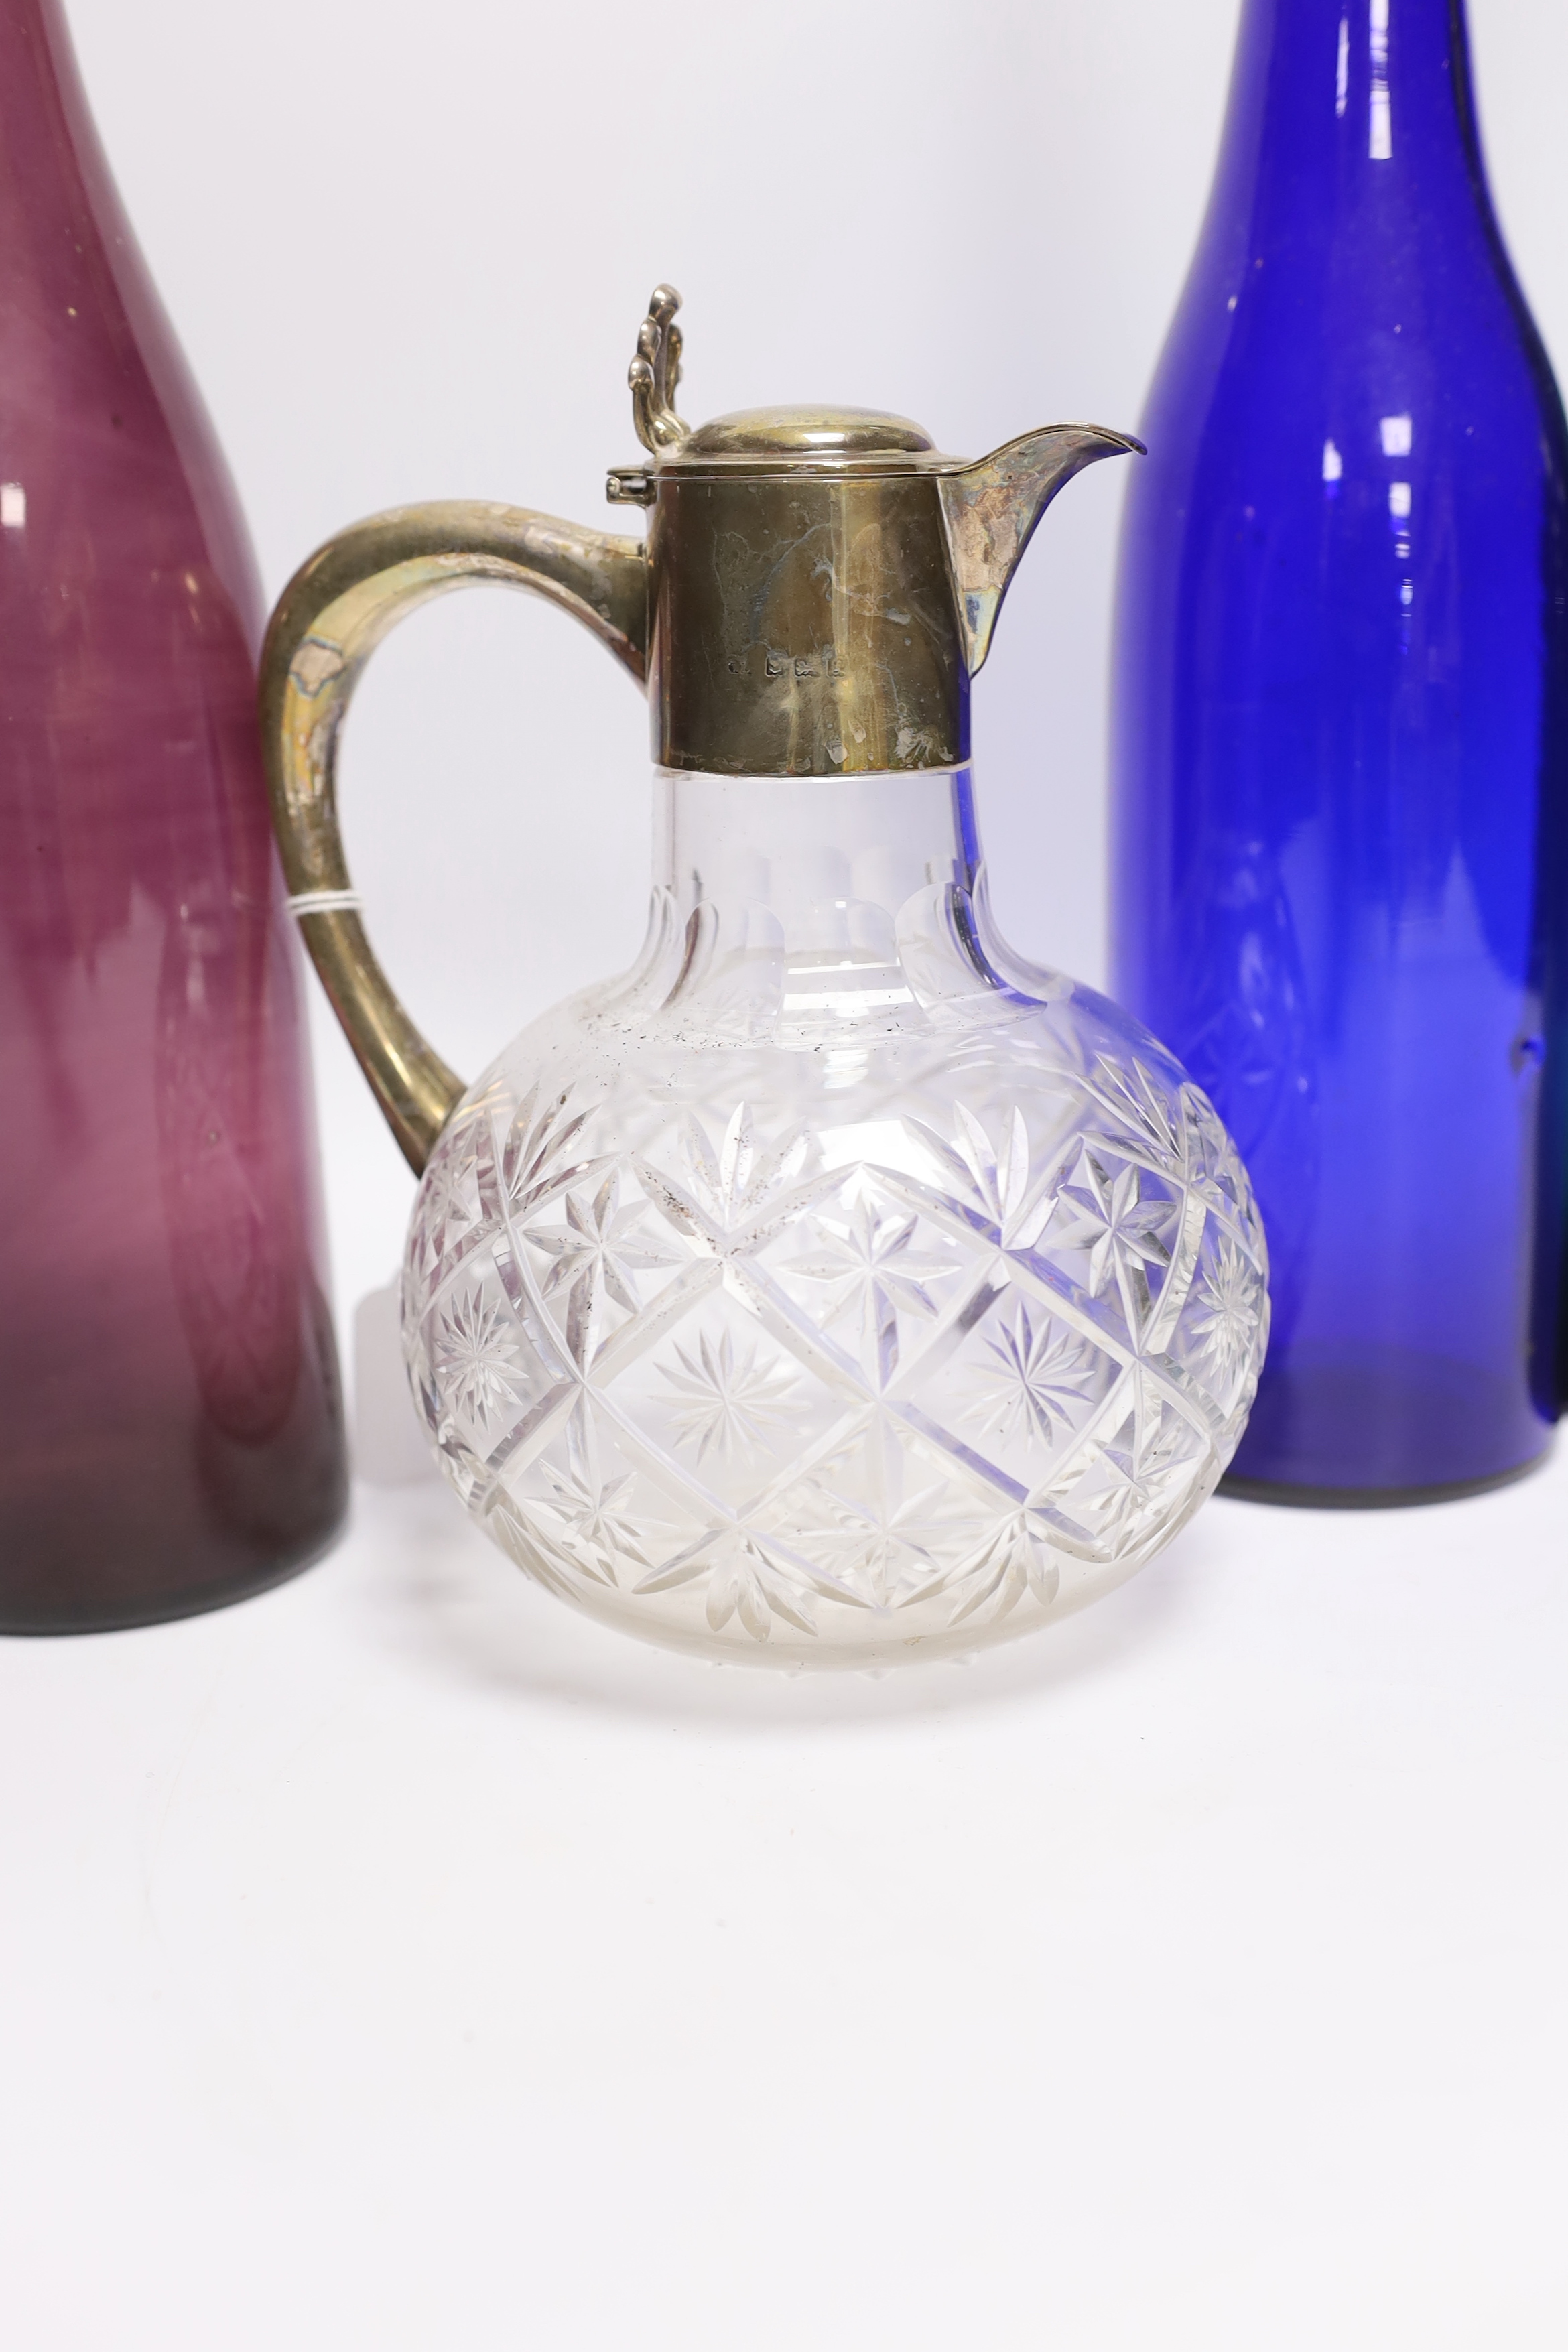 A silver mounted glass claret jug and three coloured glass bottles, 37cm